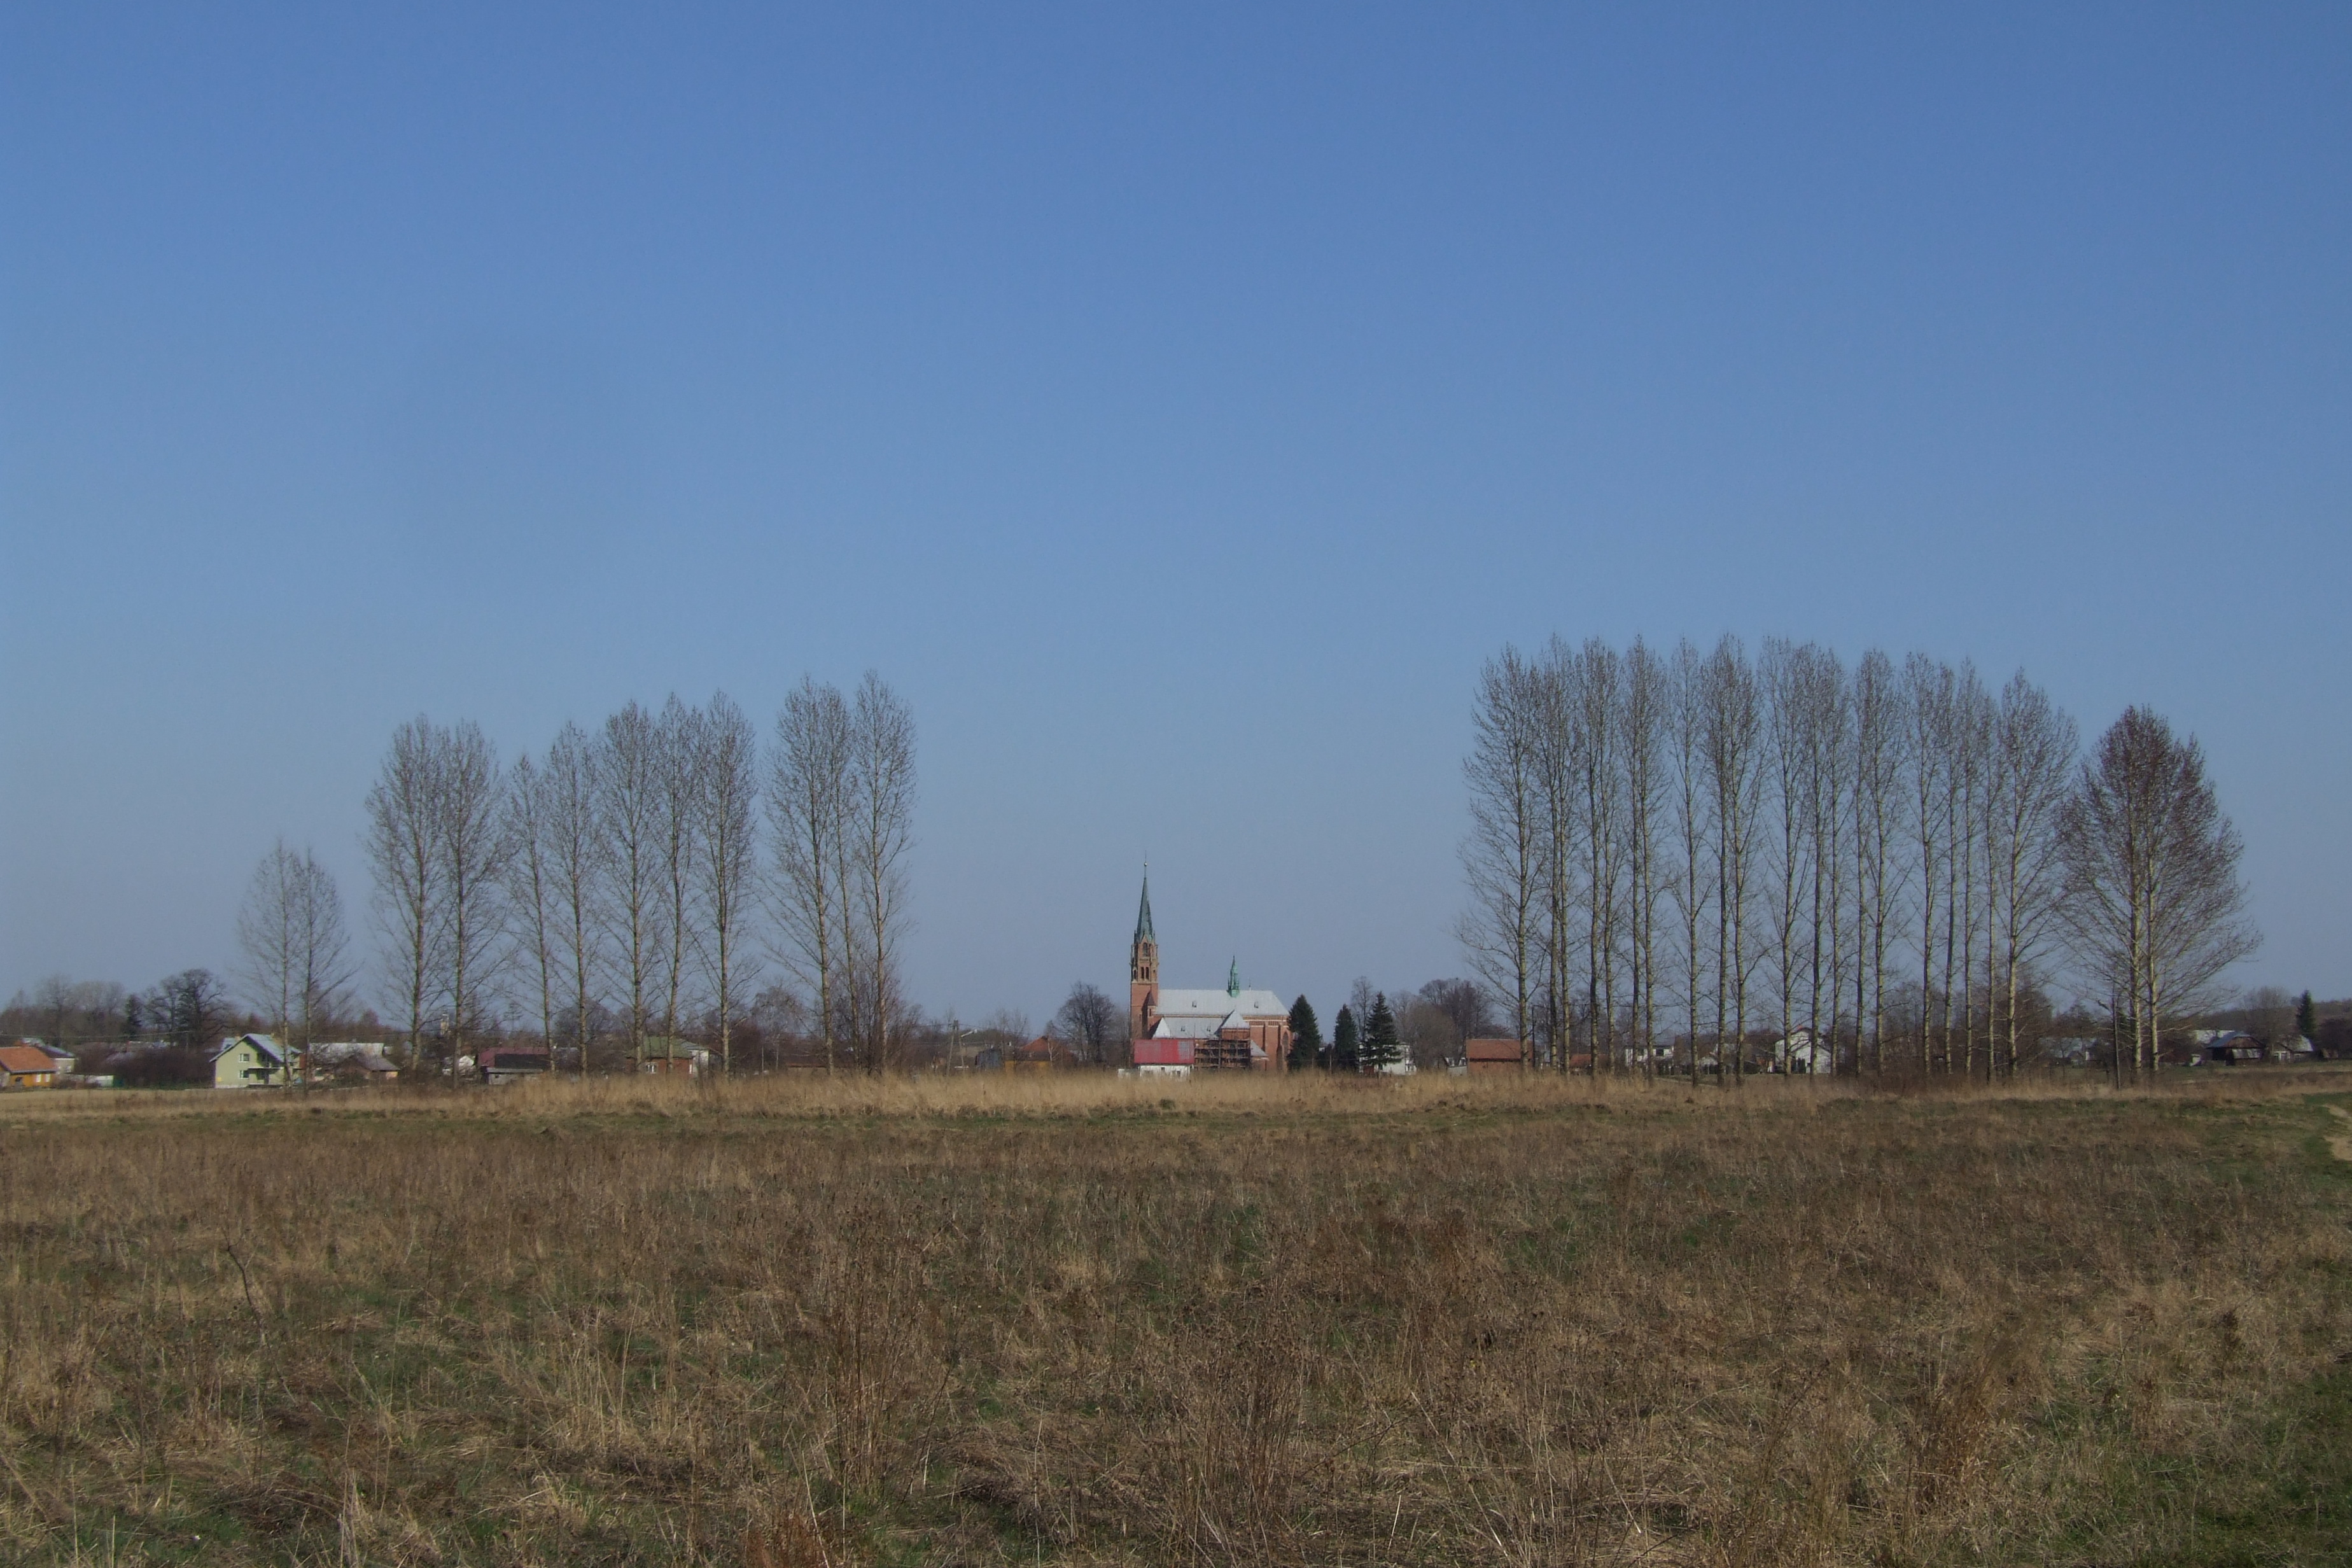 Photograph: Church And Trees